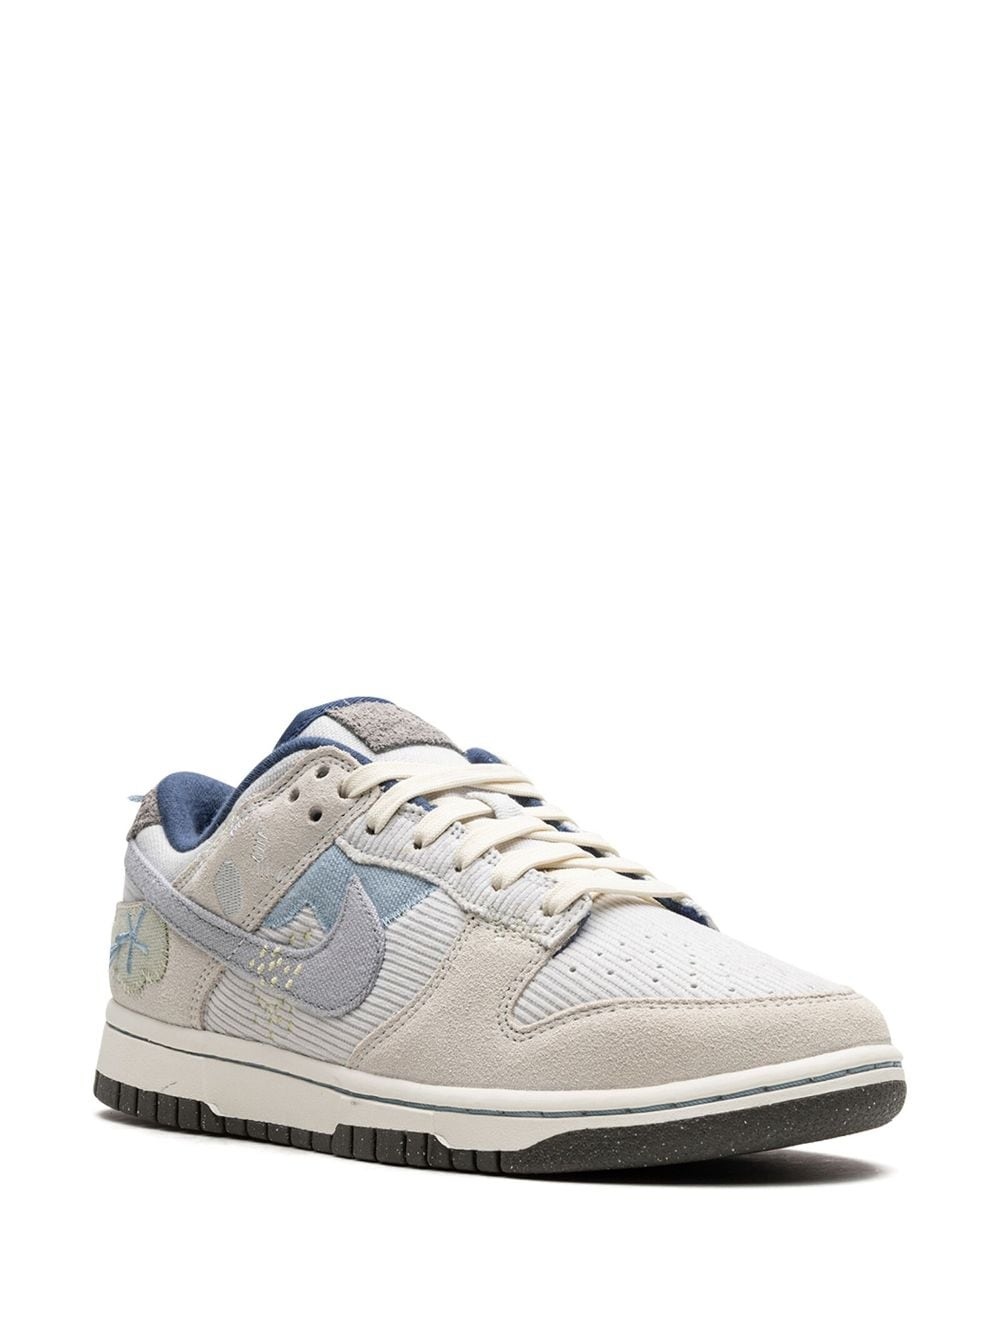 Dunk Low "Photon Dust" sneakers - 2